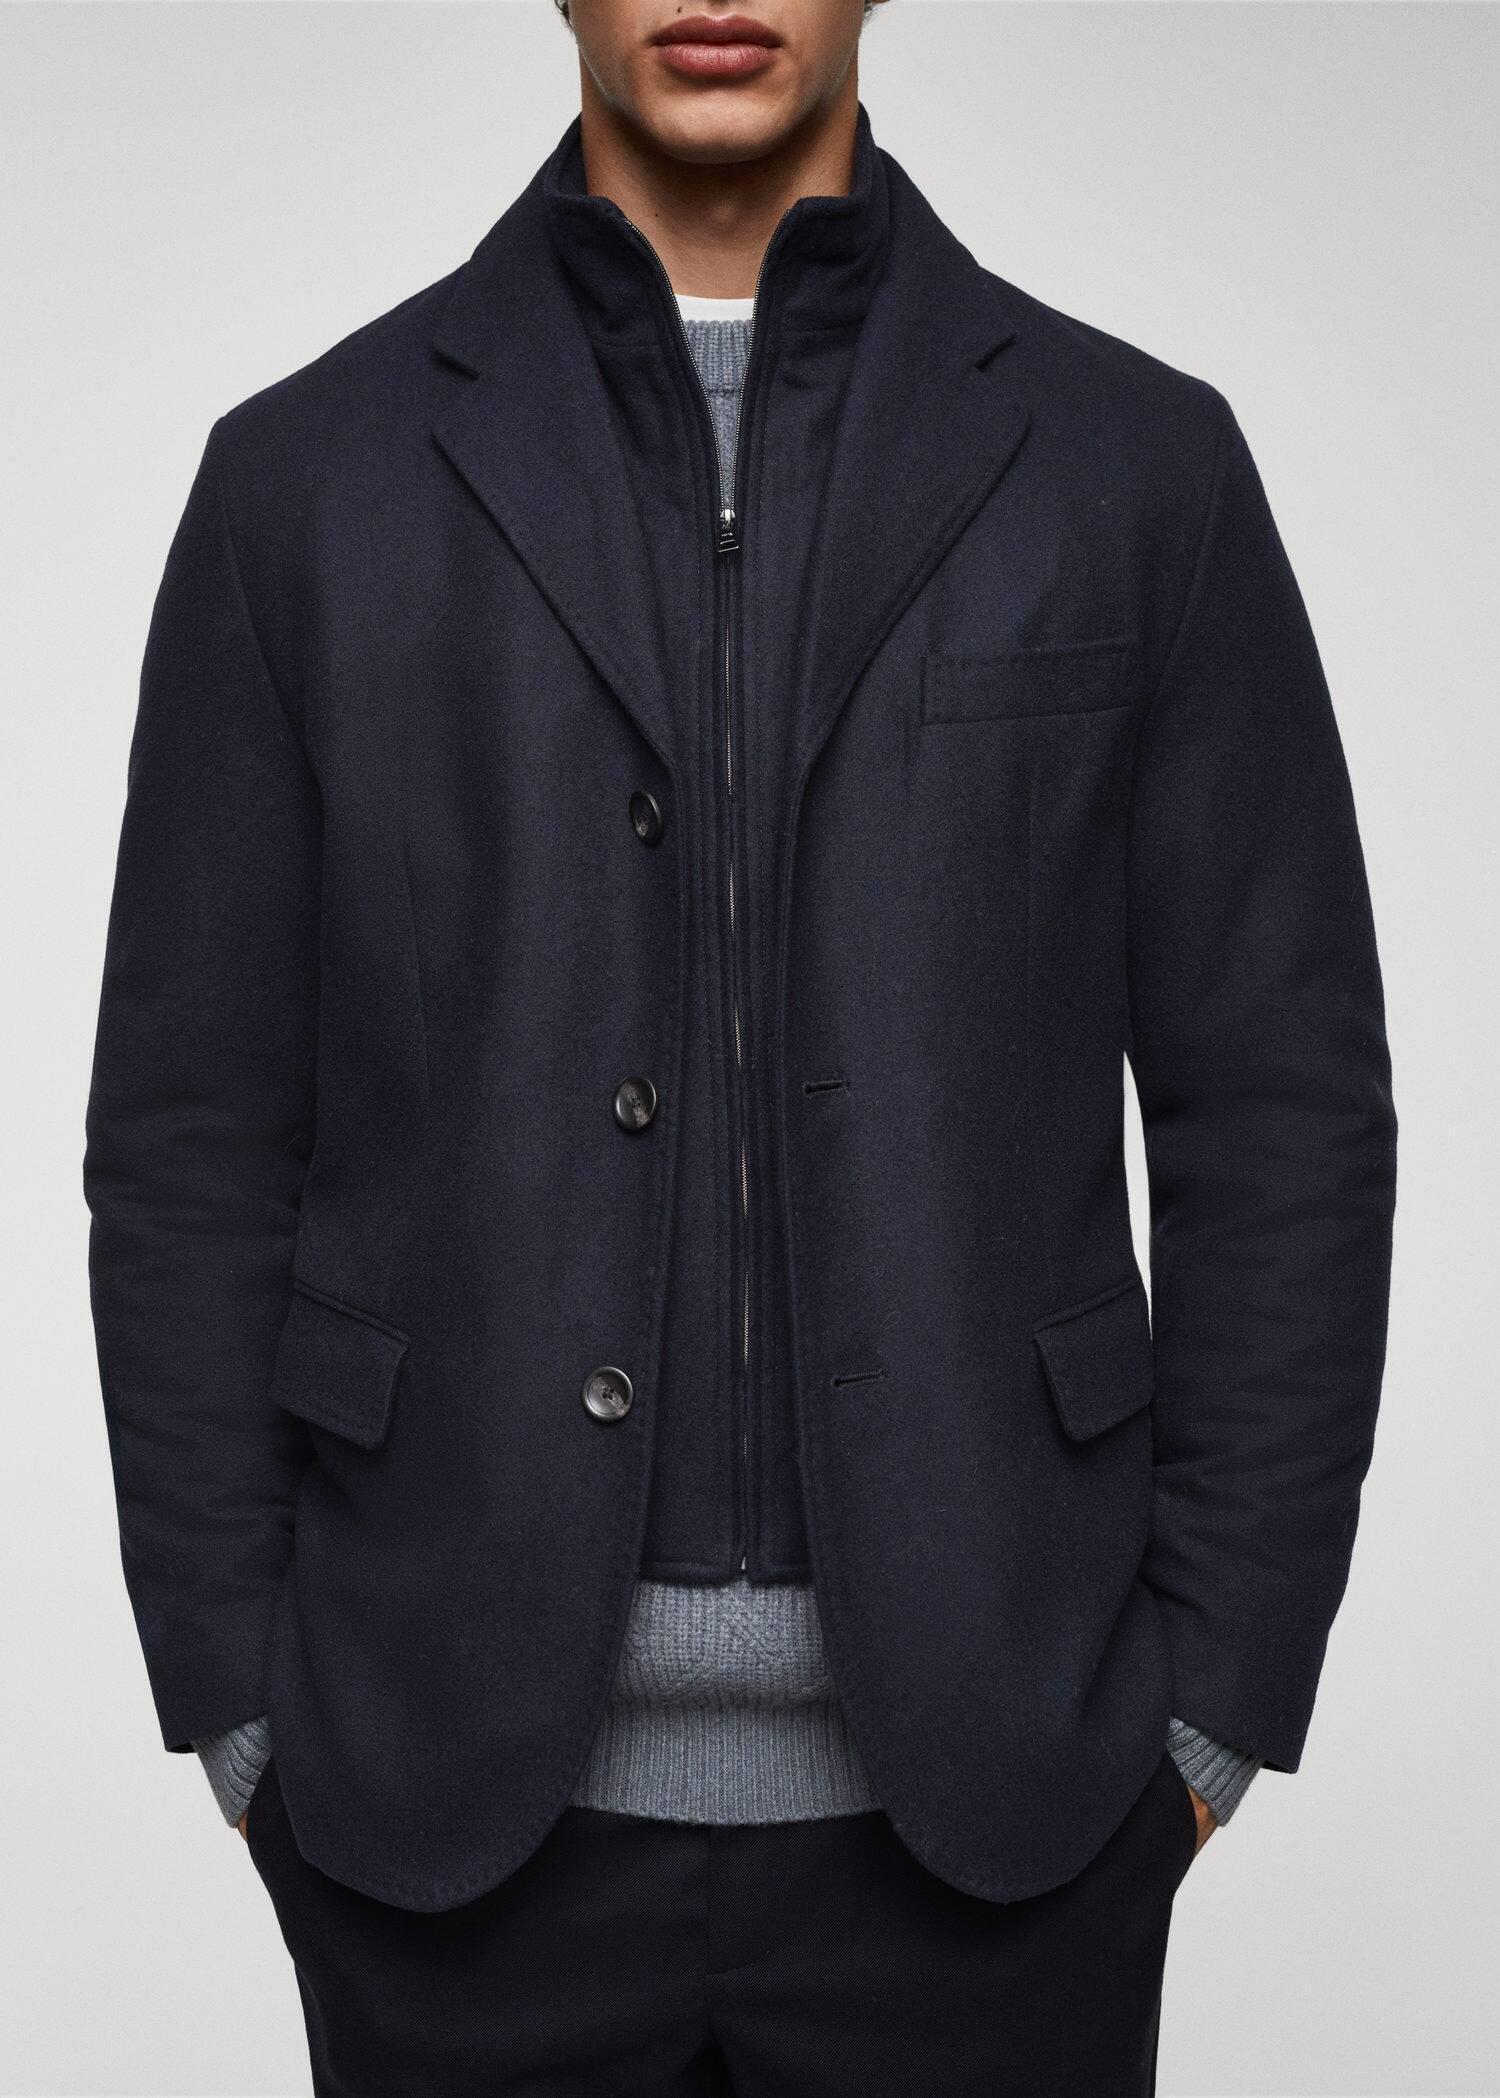 Mango - Navy Quilted Wool Jacket